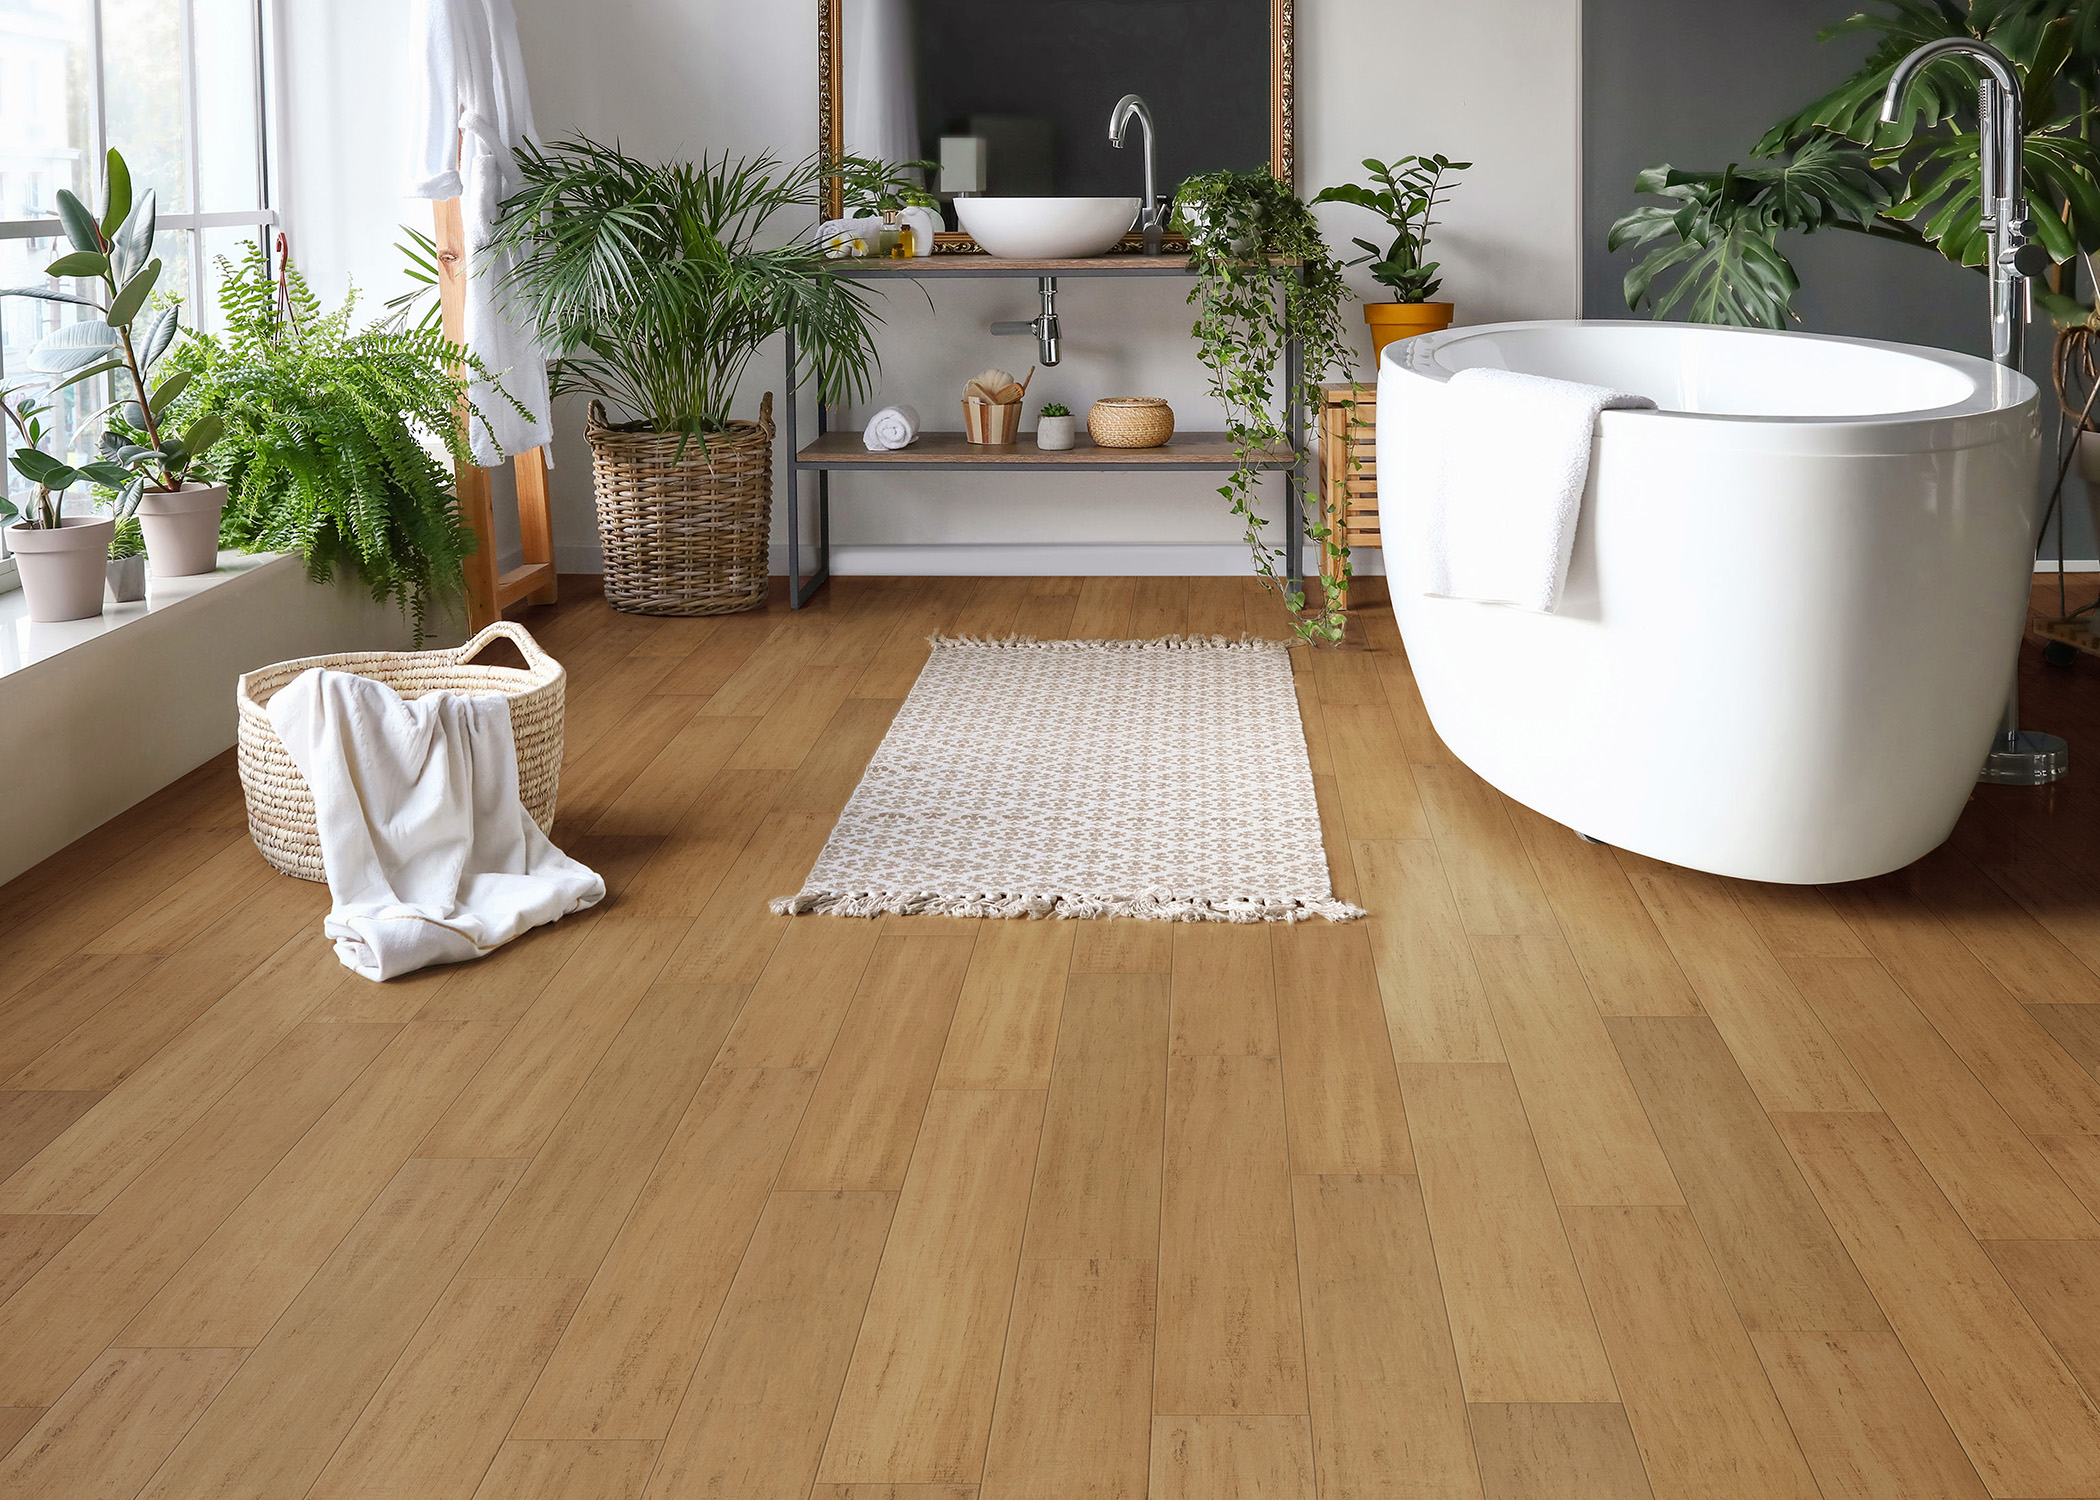 blonde water resistant engineered bamboo floor in bathroom with freestanding oval bathtub plus window sill filled with green plants and small off white bath mat on floor